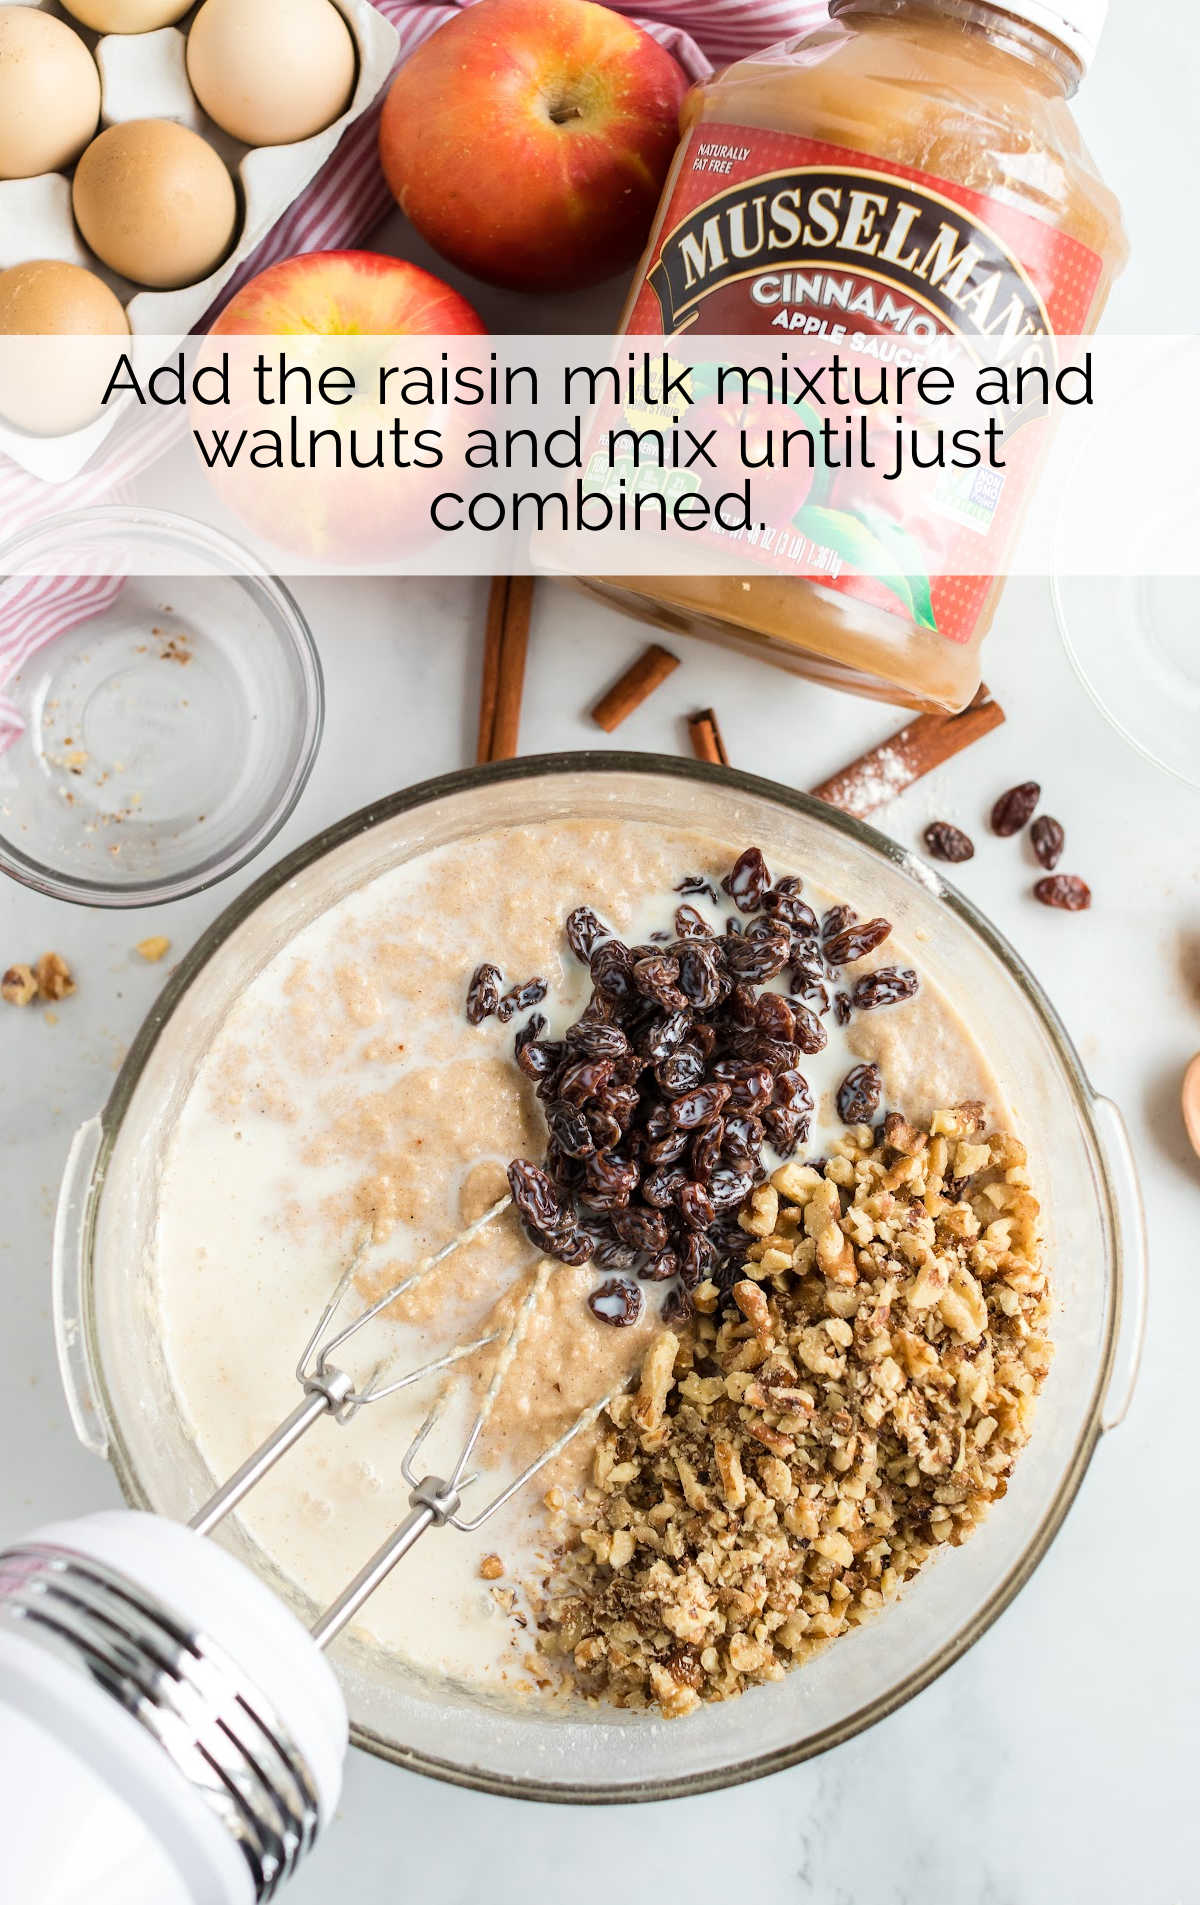 raisin milk mixture and walnuts blended into the cake batter mixture